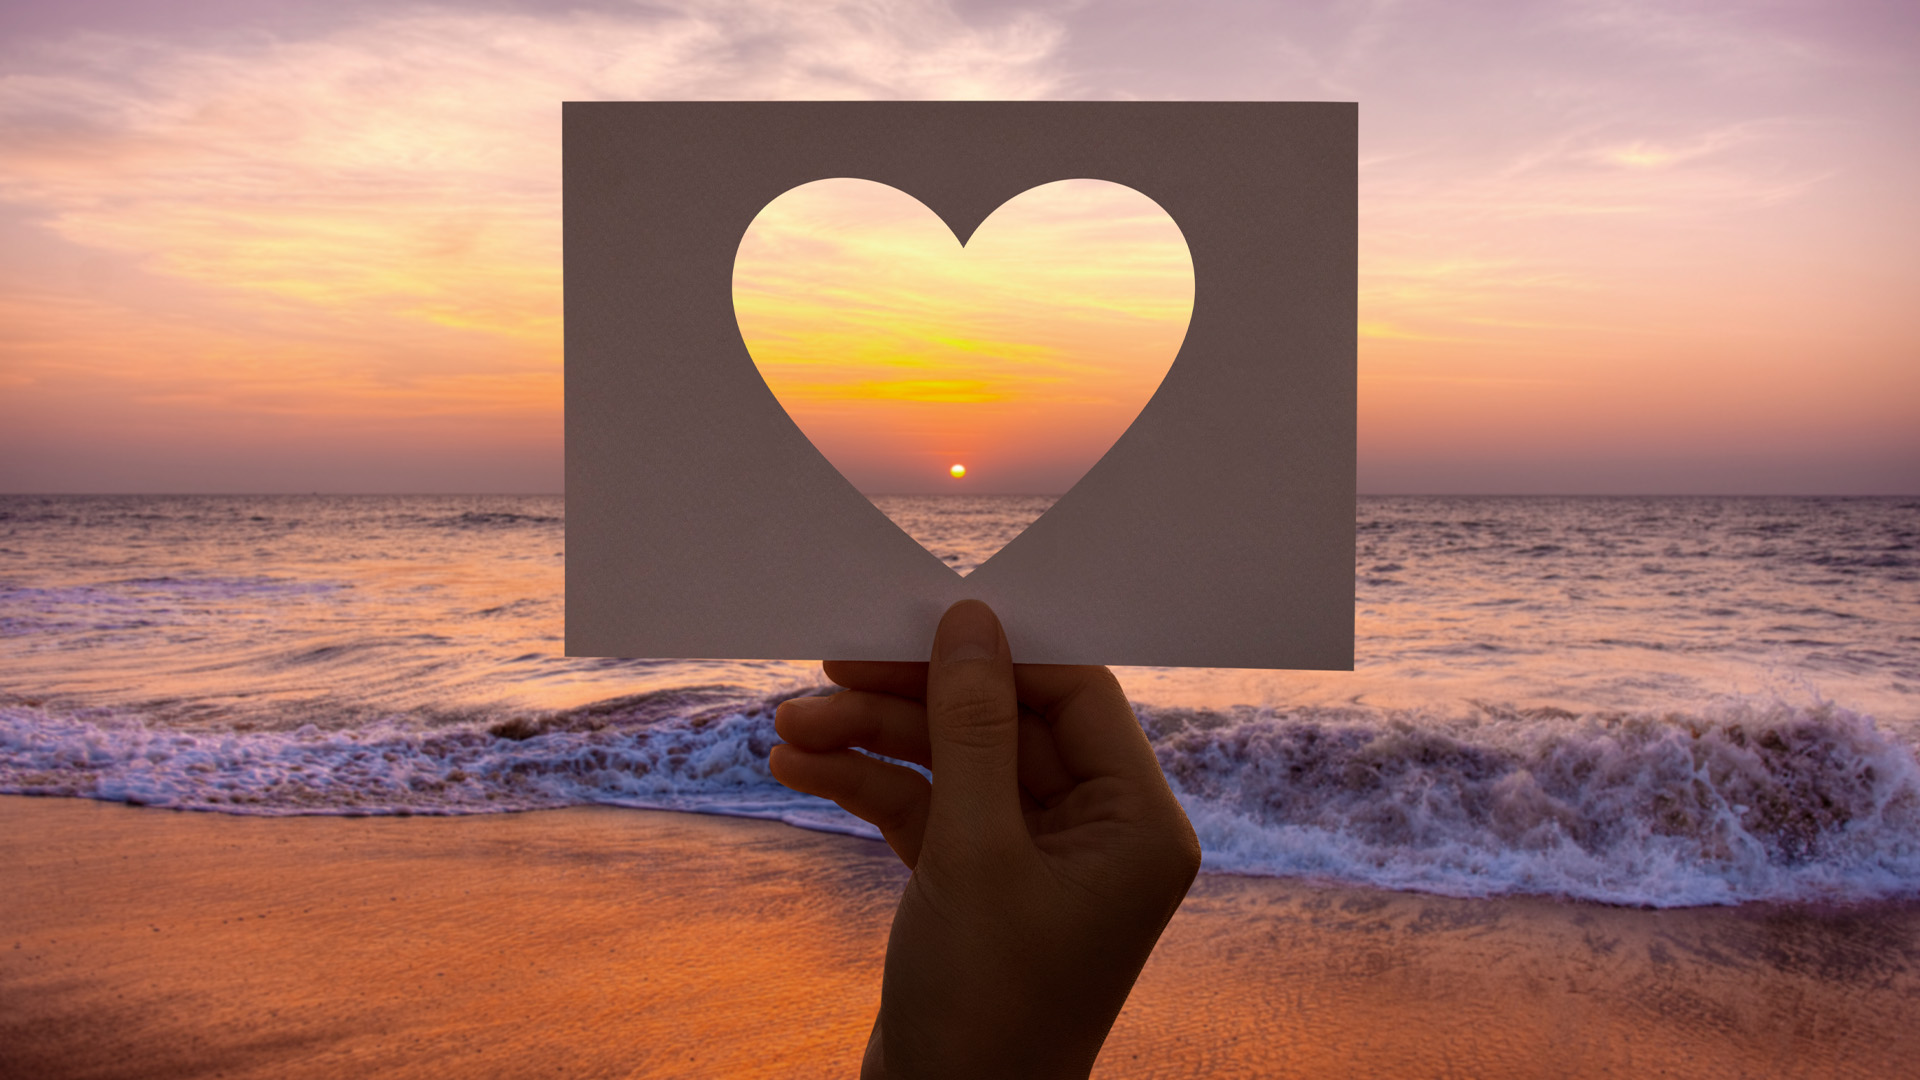 Cutout heart with sunset and ocean in background.